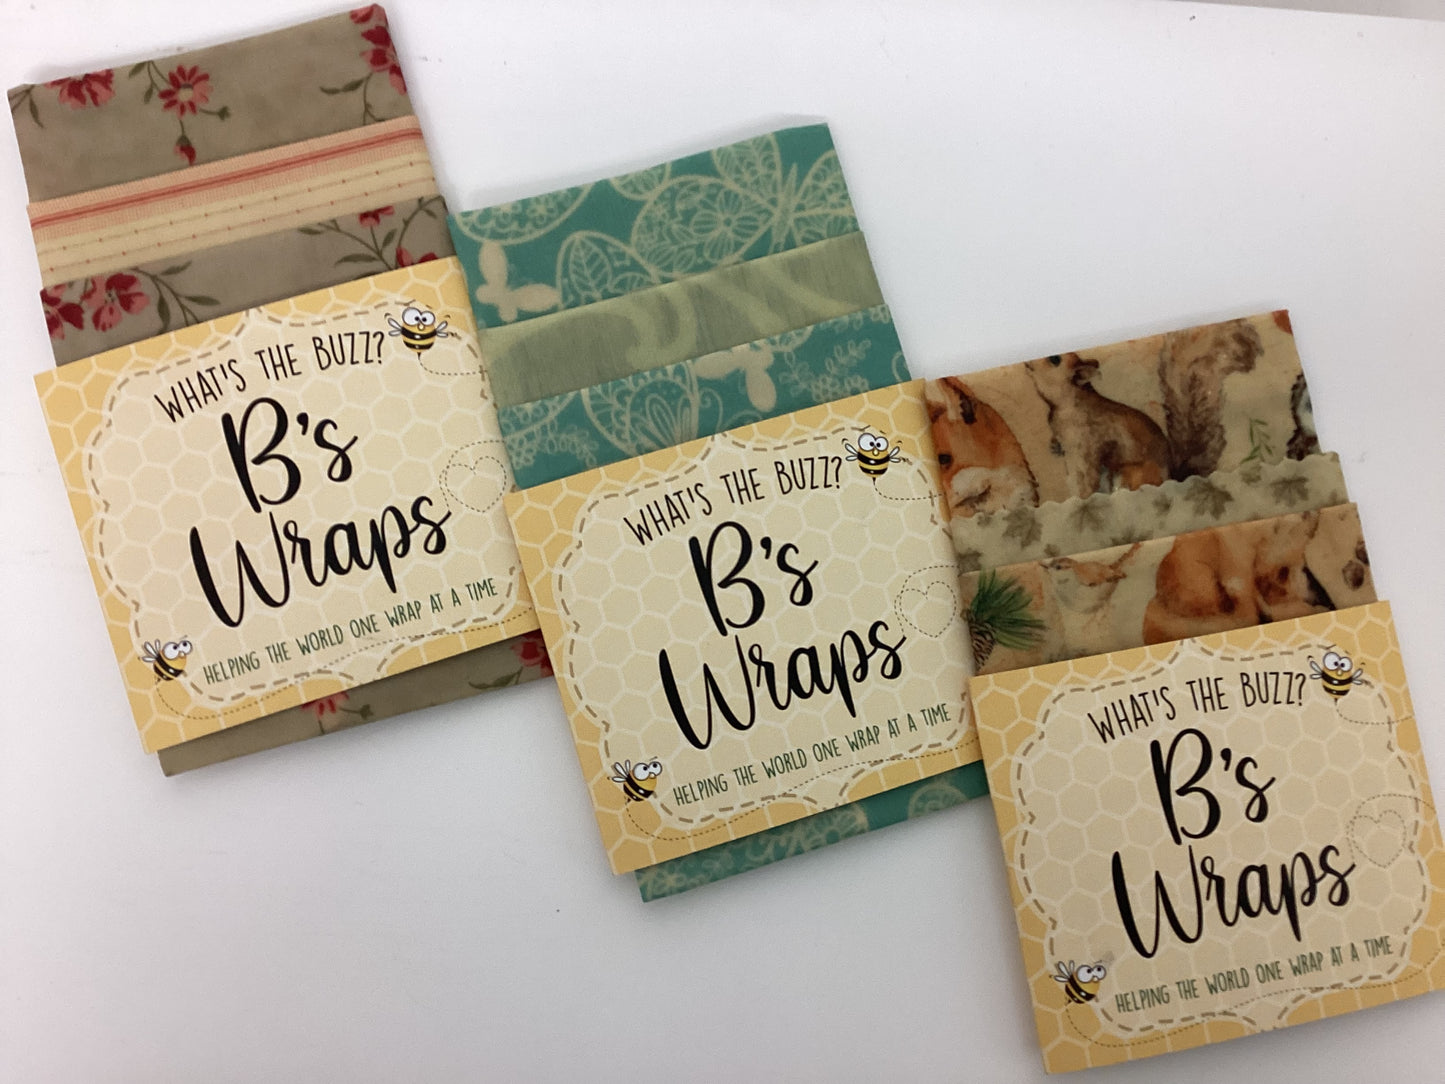 B's Wraps - 4 pack of wraps